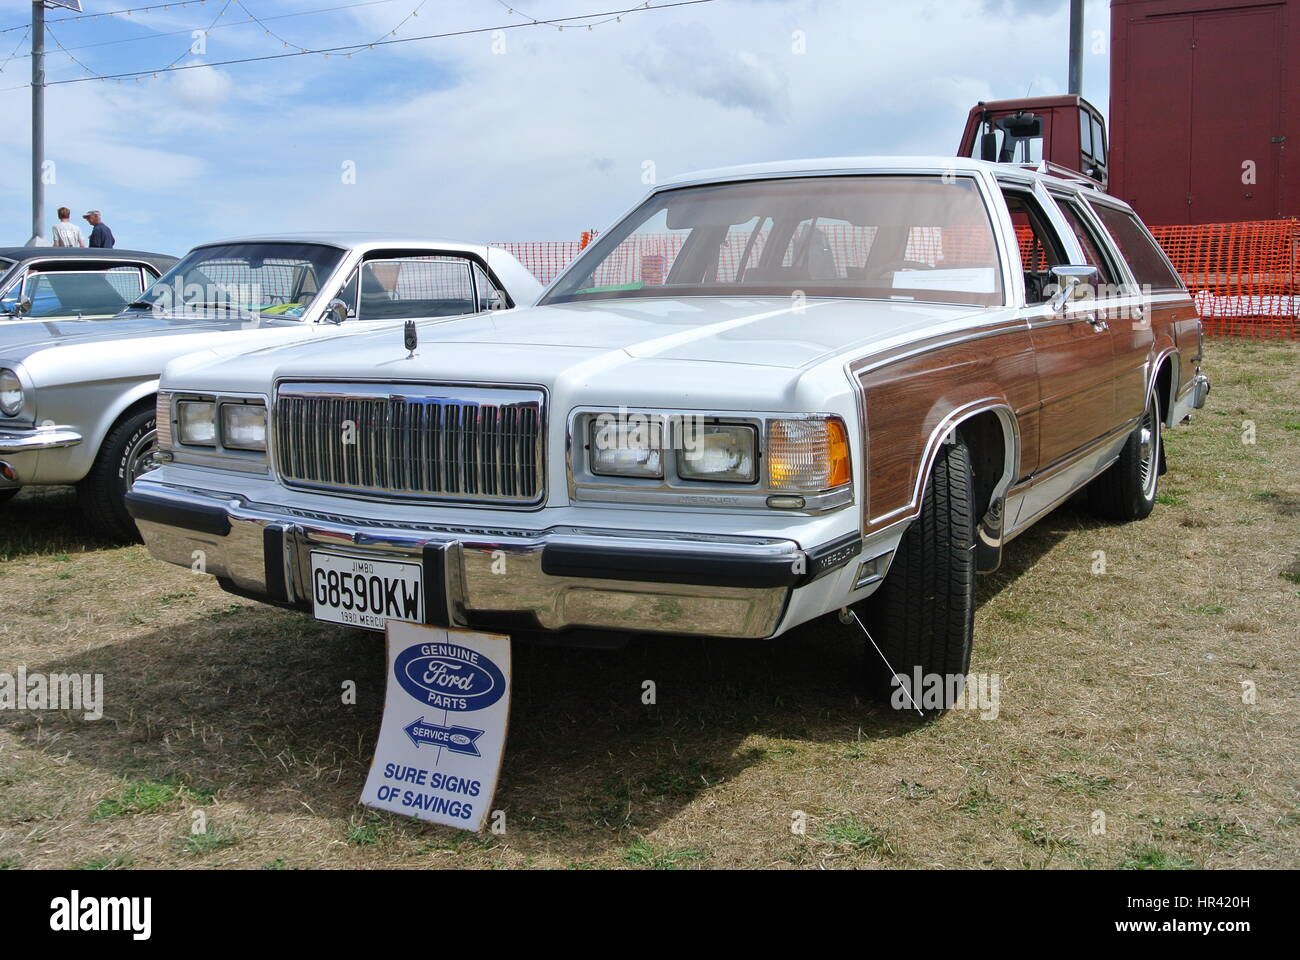 Lincoln-Mercury Grand Marquis estate car parked up on display Stock Photo